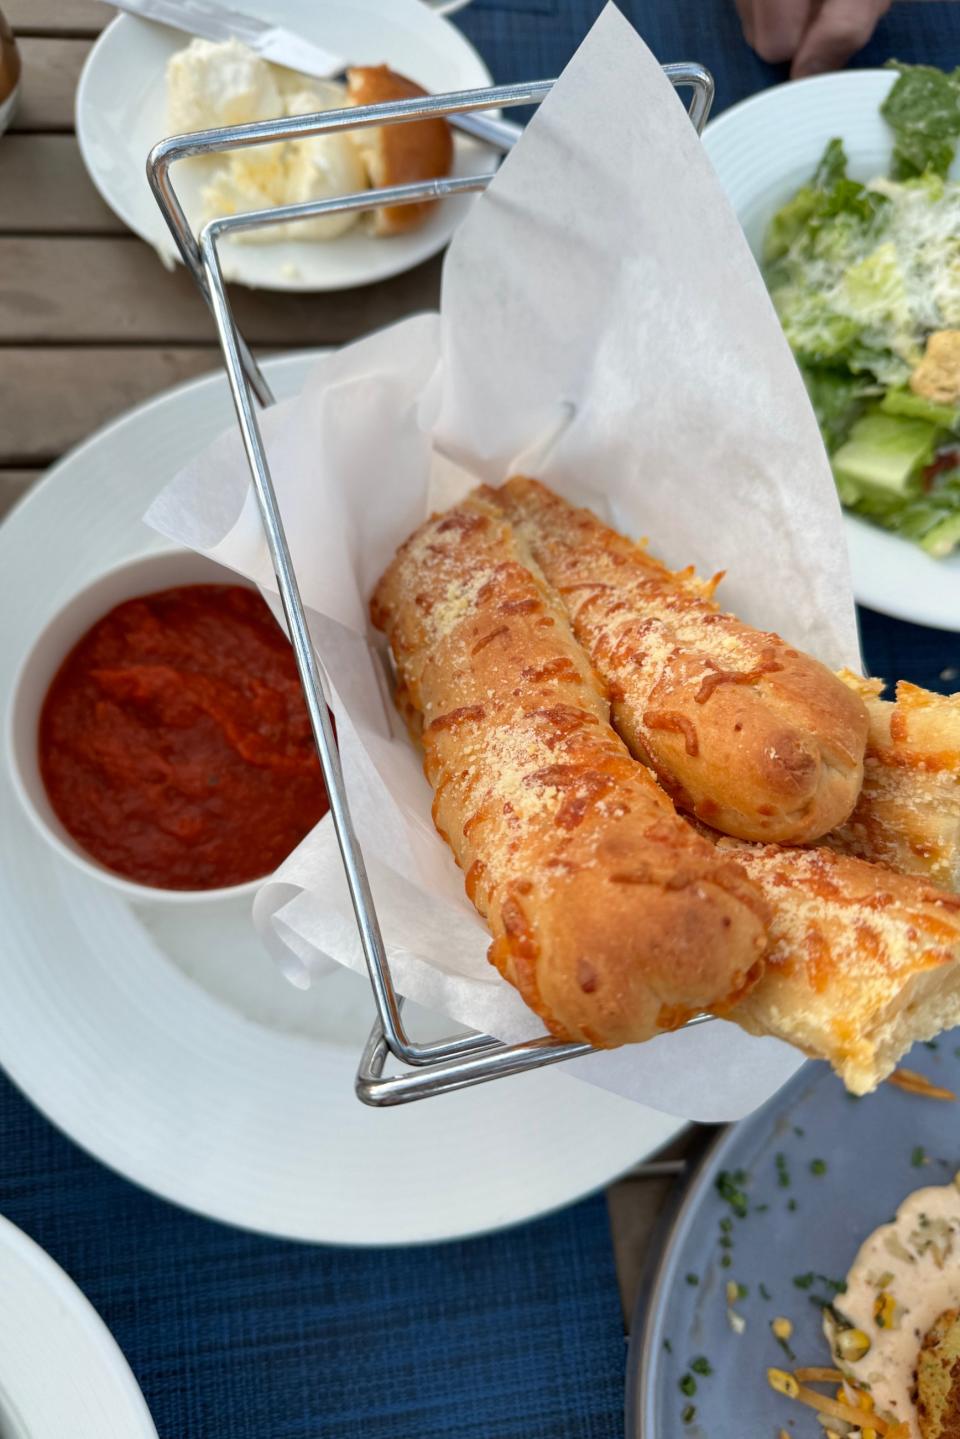 Garlic breadsticks in a metal basket with marinara sauce on a table, suggesting a dining experience while traveling